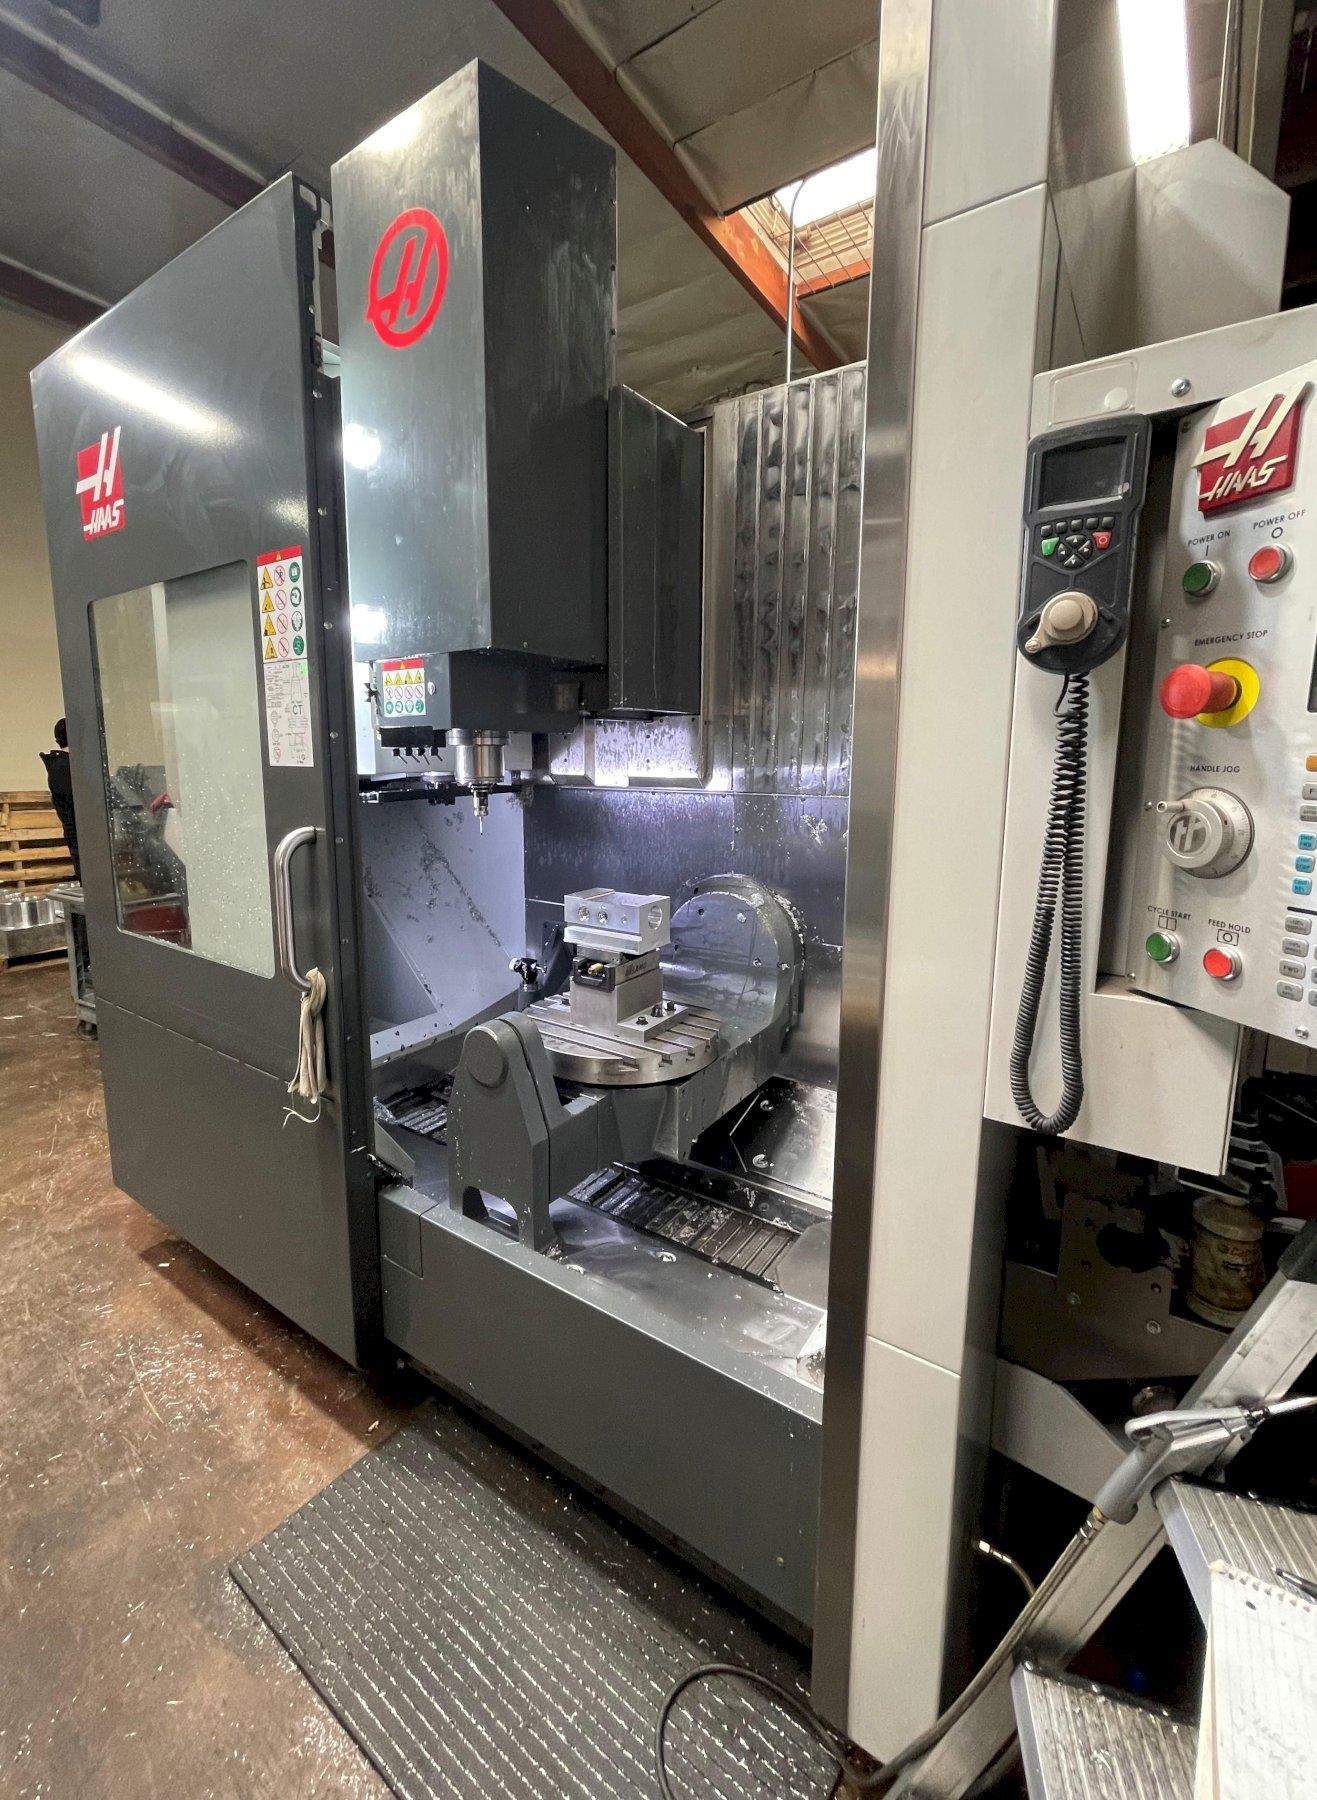 Haas UMC-750SS Super-Speed 5-Axis Vertical Machining Center 32 GB Expanded Memory Belt Type Chip Conveyor and More